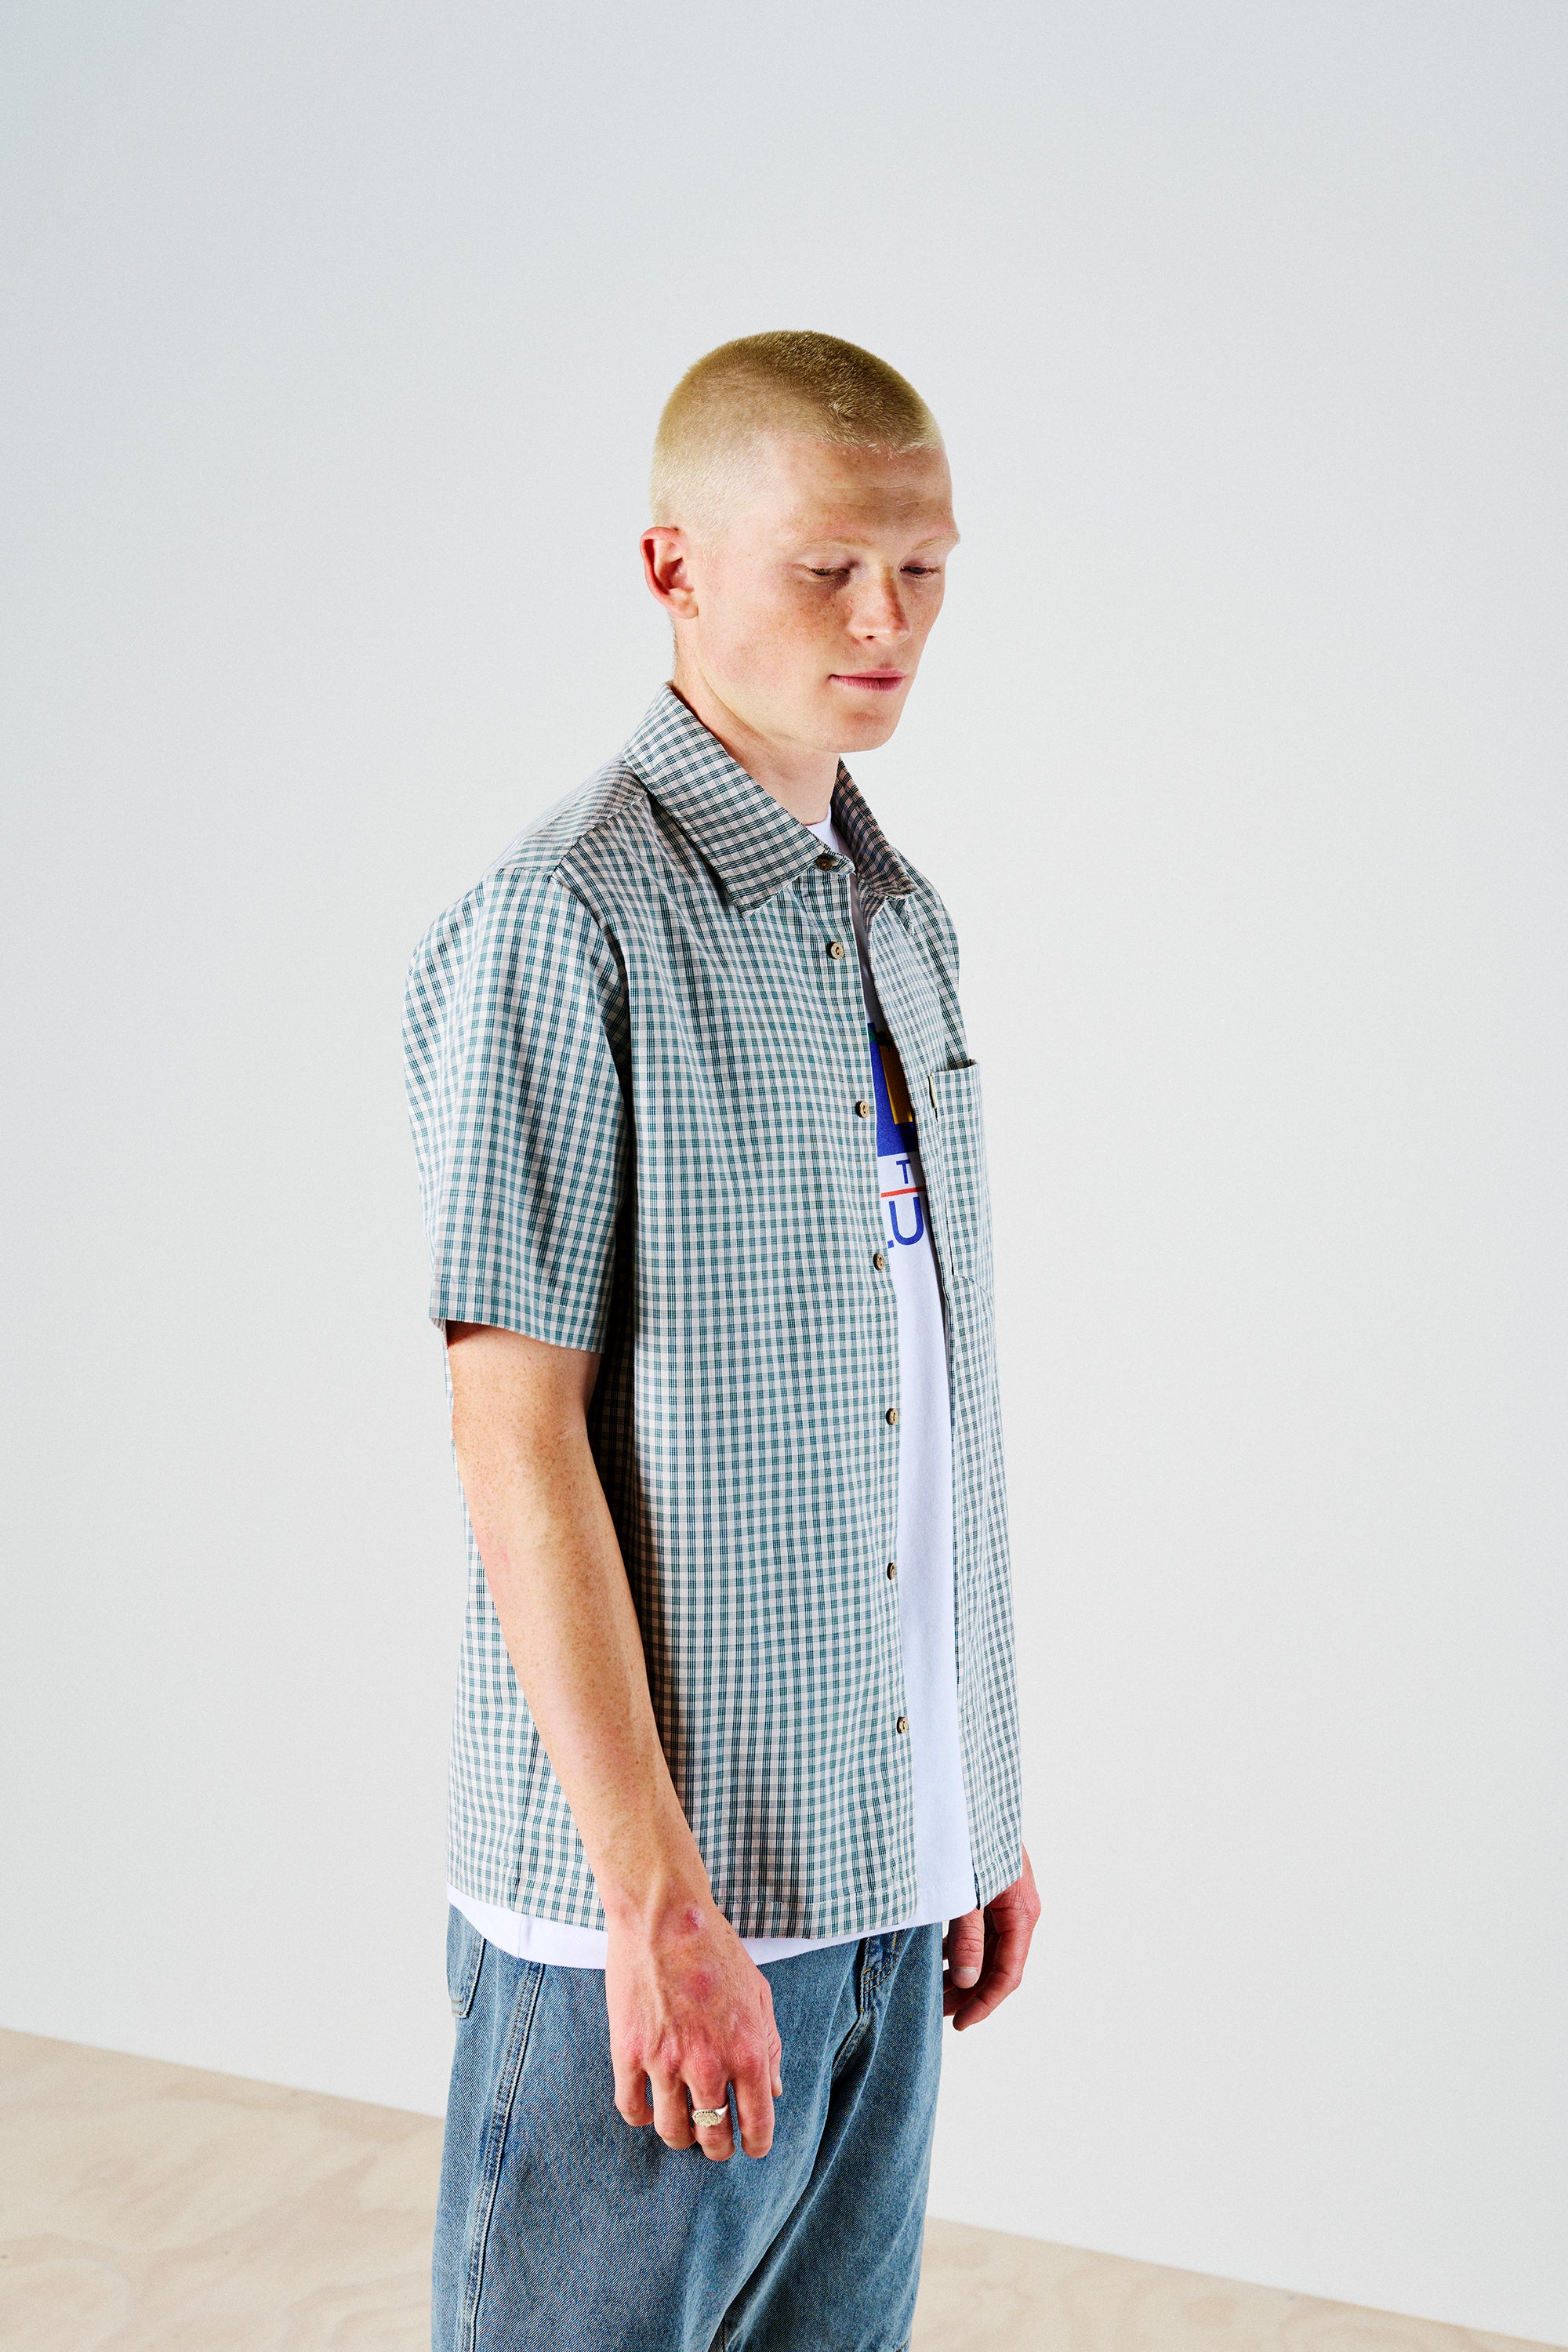 Grid Button Up - Green